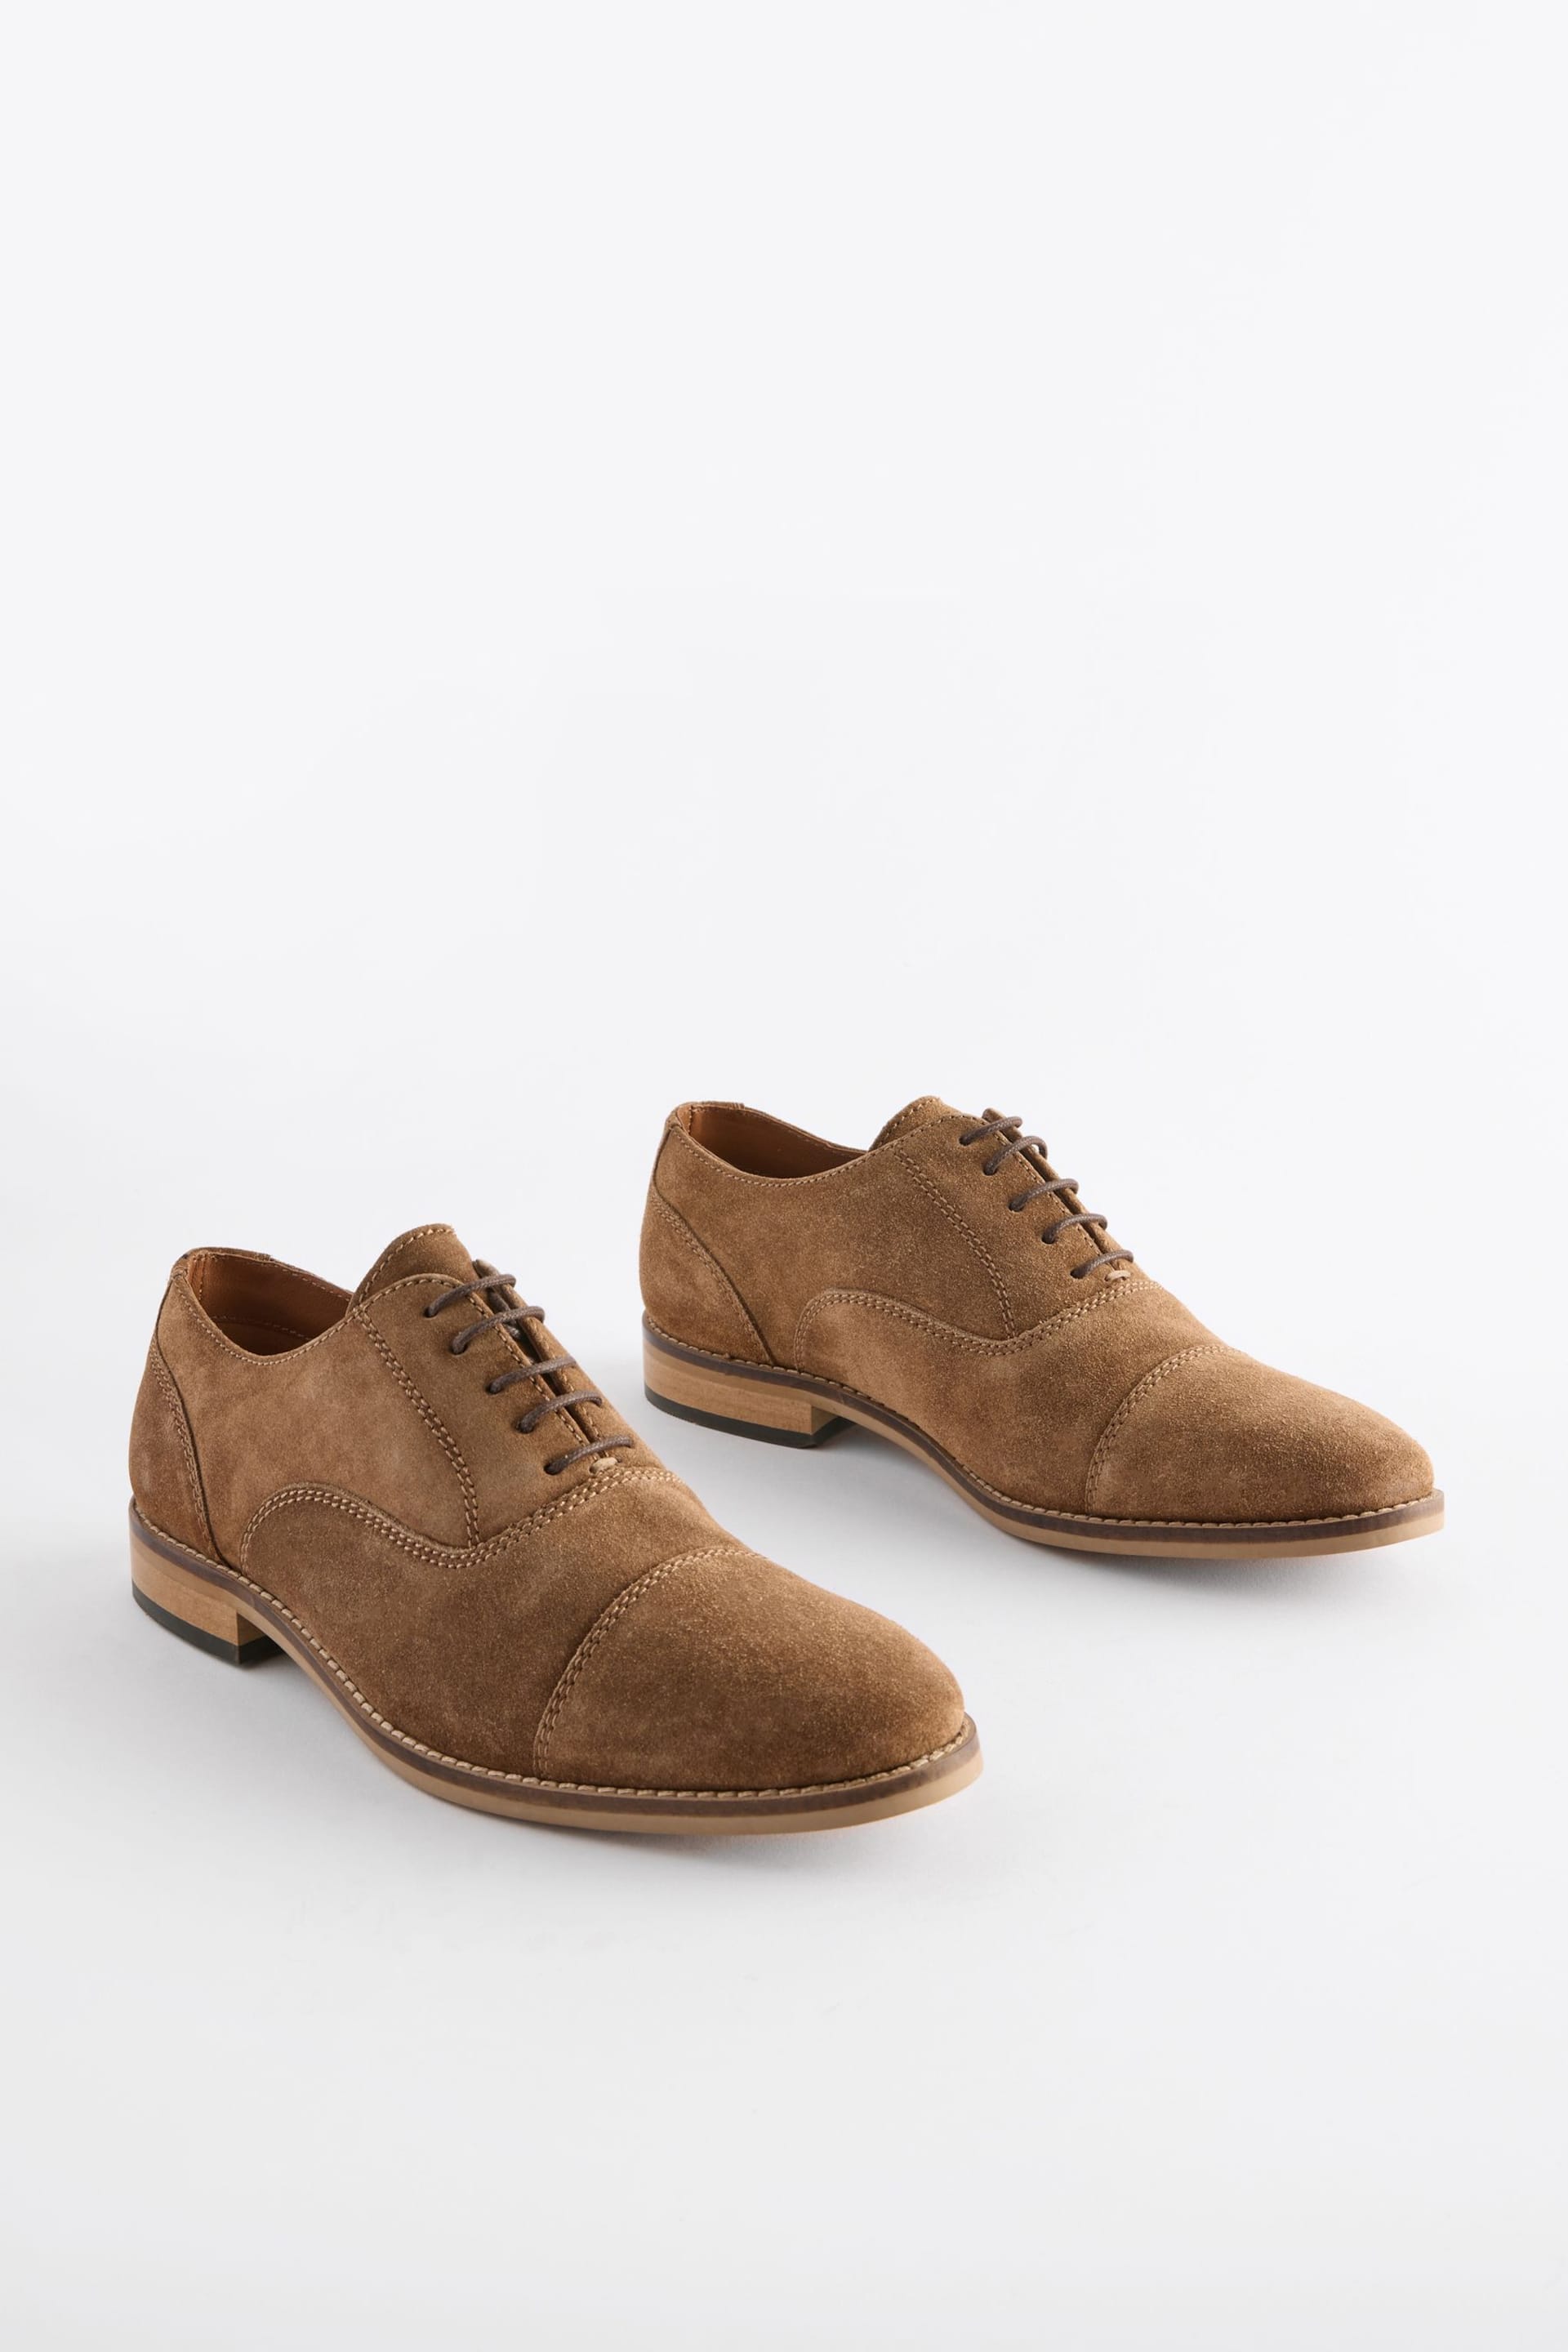 Stone Suede Contrast Sole Toecap Shoes - Image 2 of 6